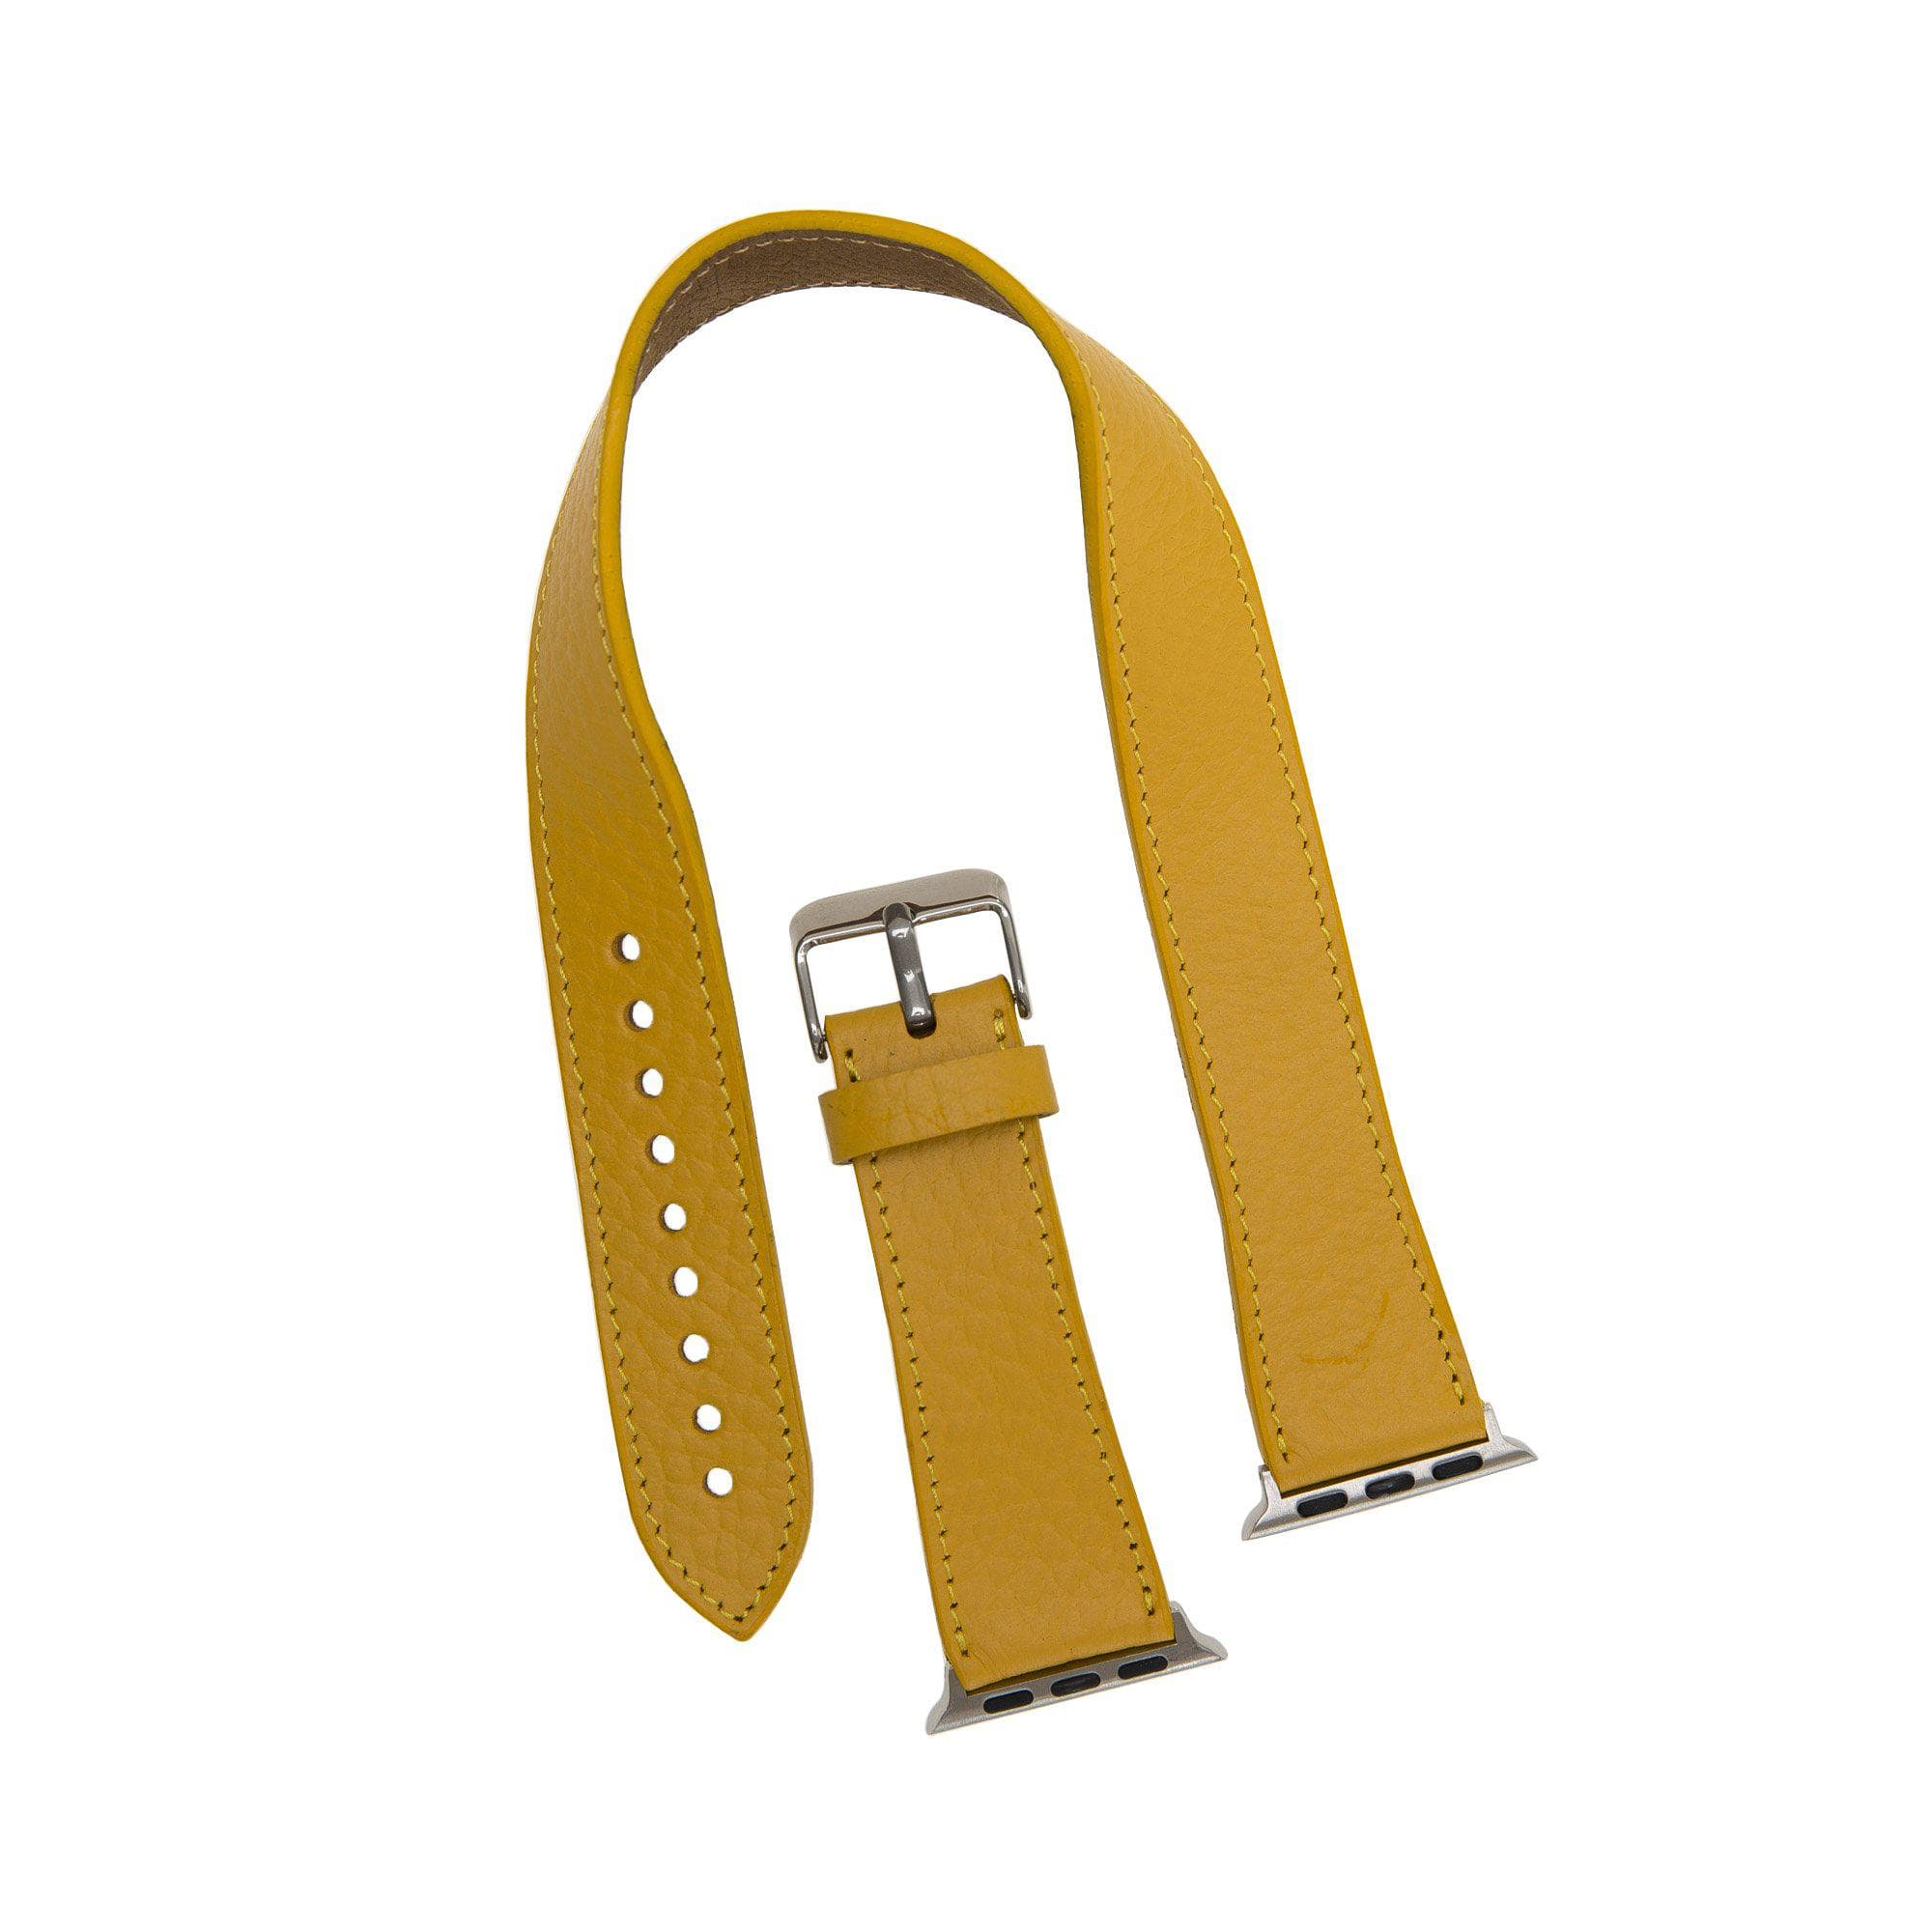 B2B - Leather Apple Watch Bands - DT Double Tour Style Bouletta B2B